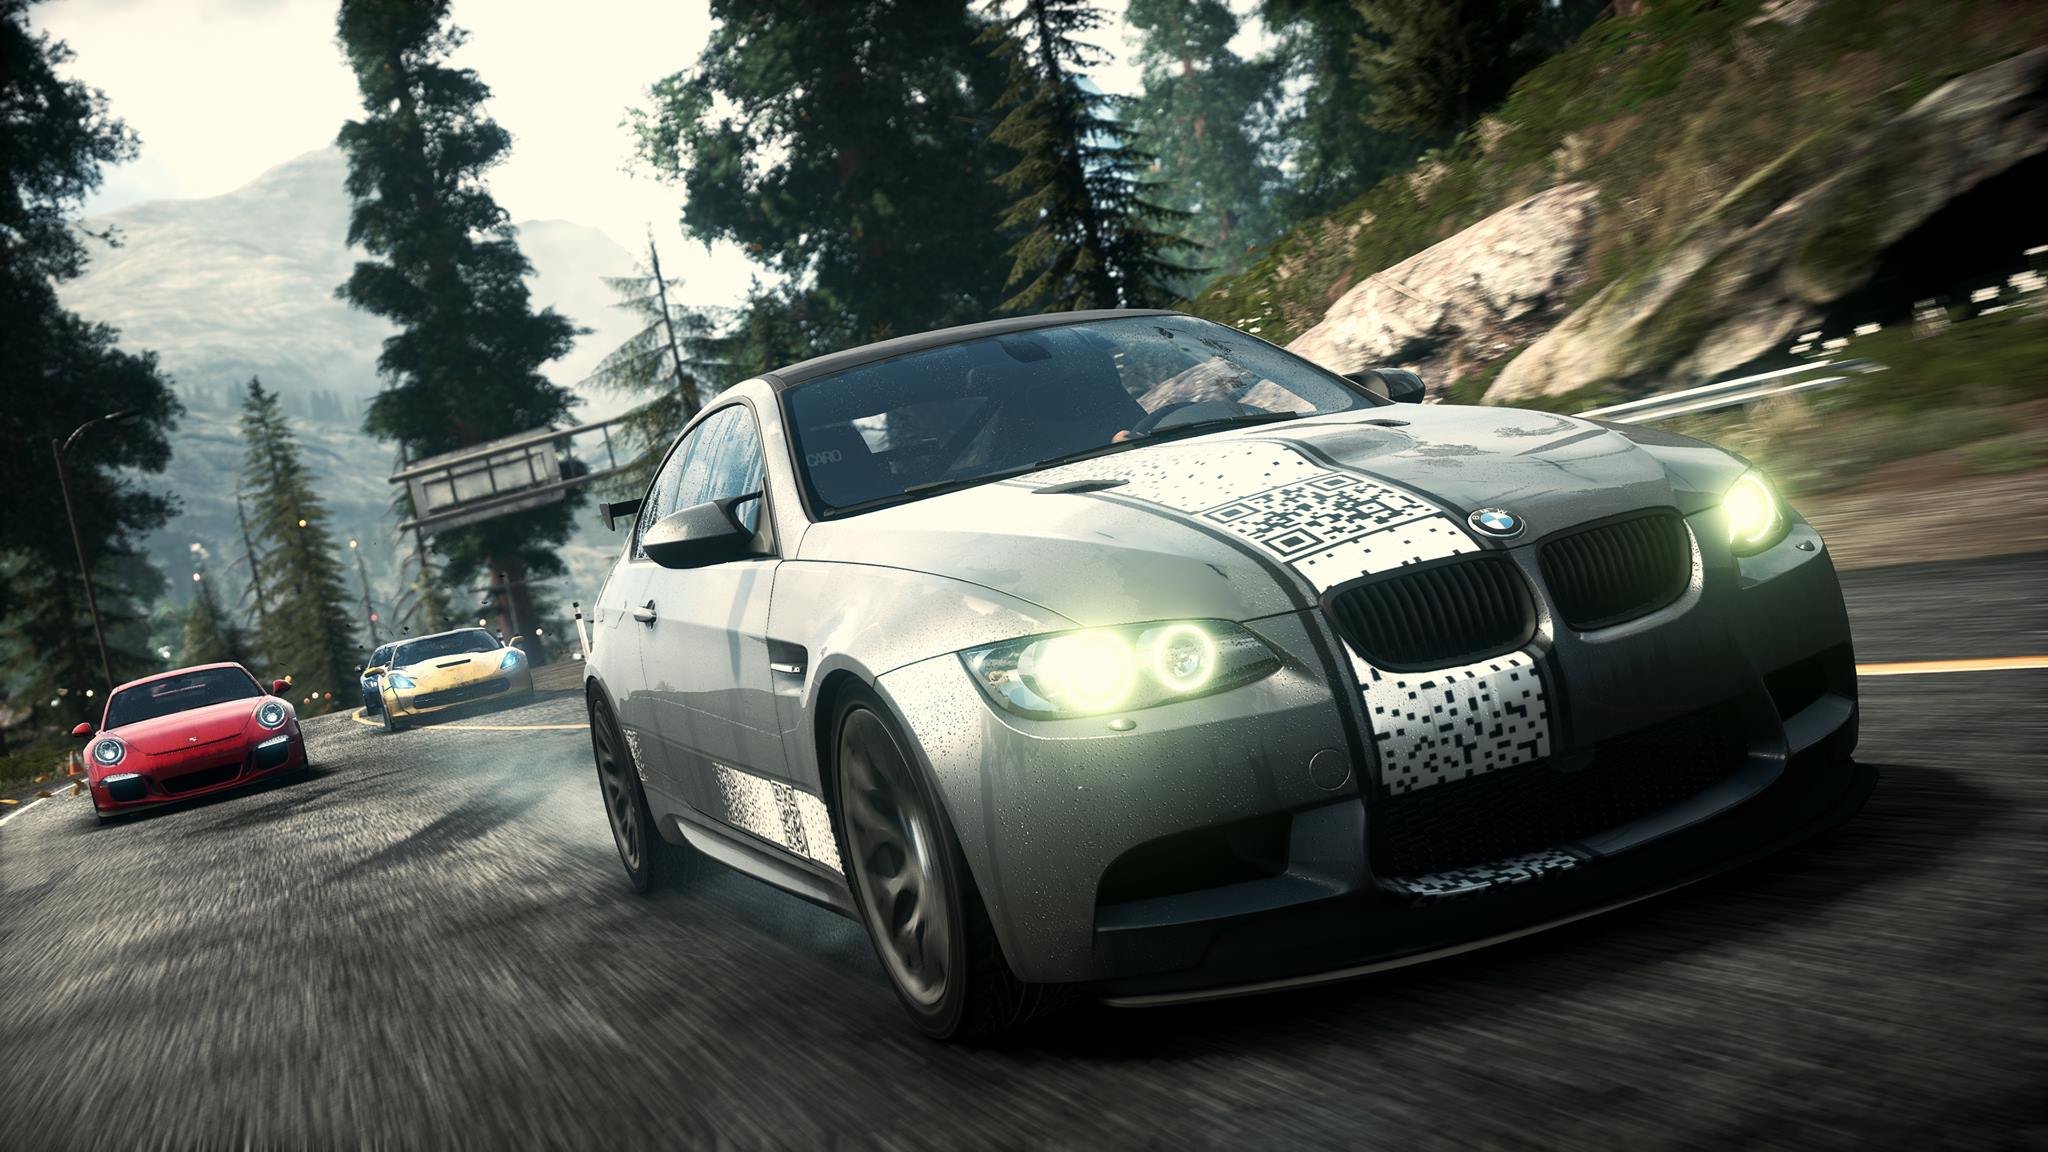 Need for Speed Rivals Xbox 360. Need for Speed Rivals BMW m3 GTR. Игра NFS Rivals. Need for Speed Rivals 2013.